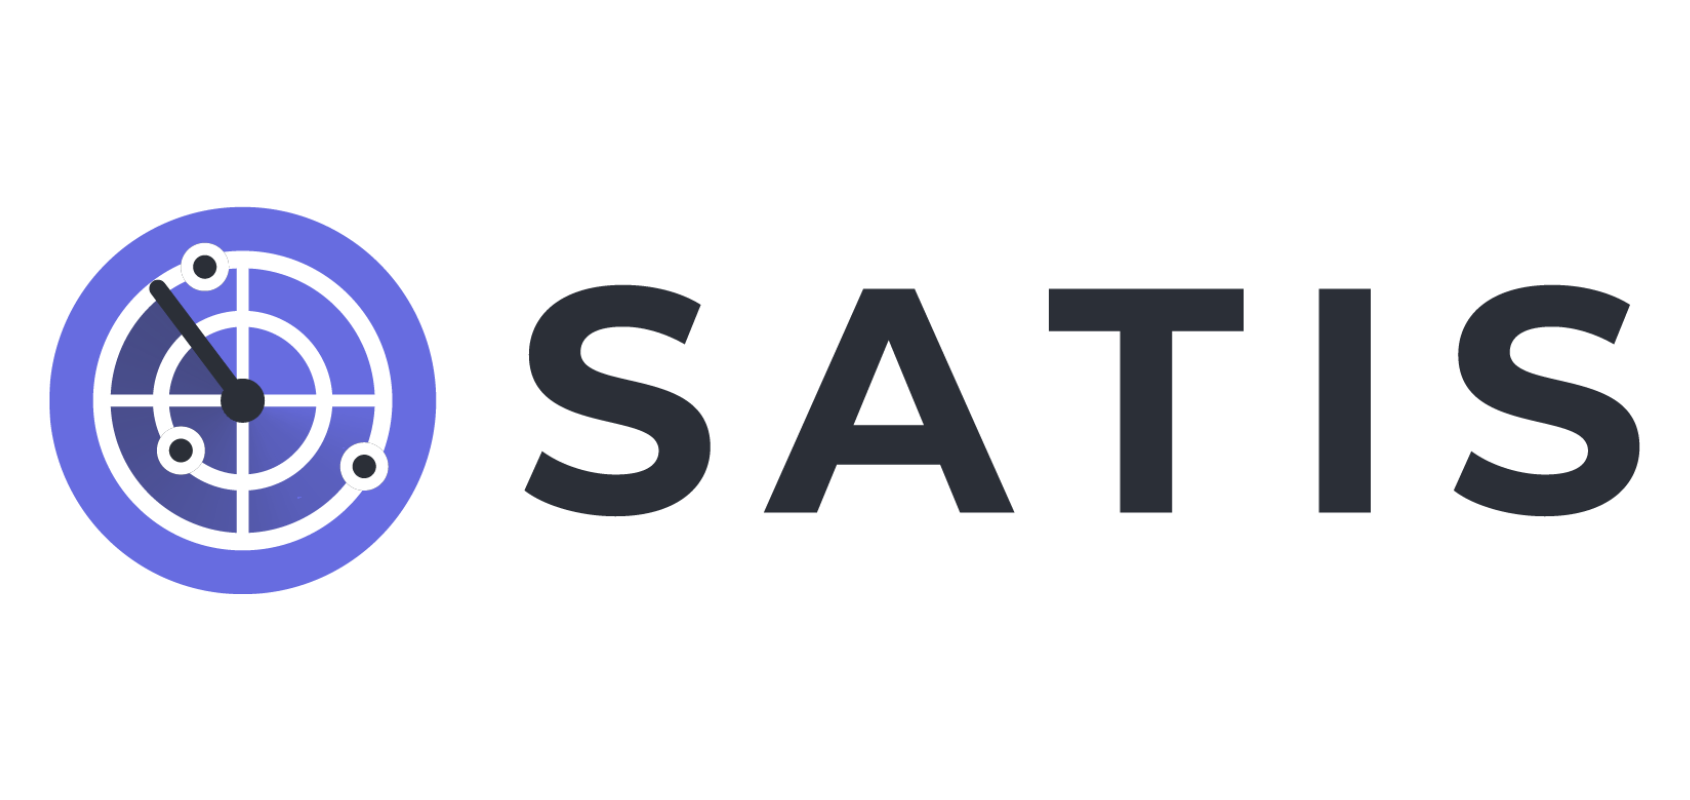 Scam Analytics and Tactical Intervention System (SATIS) protects web users from scam websites.